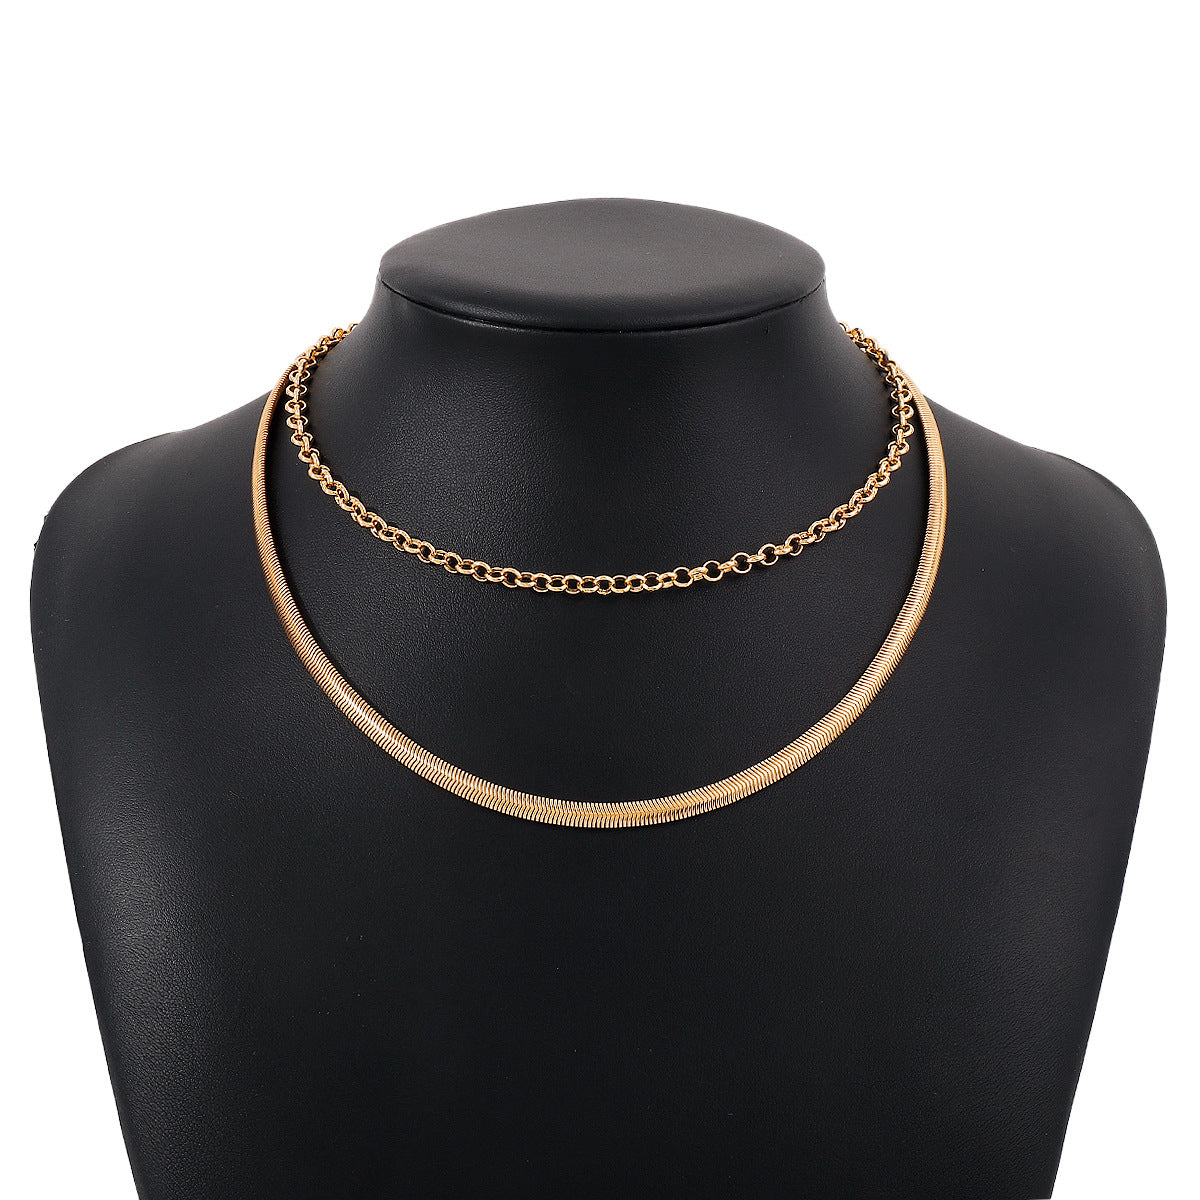 18K Gold-Plated Herringbone Chain Layered Necklace